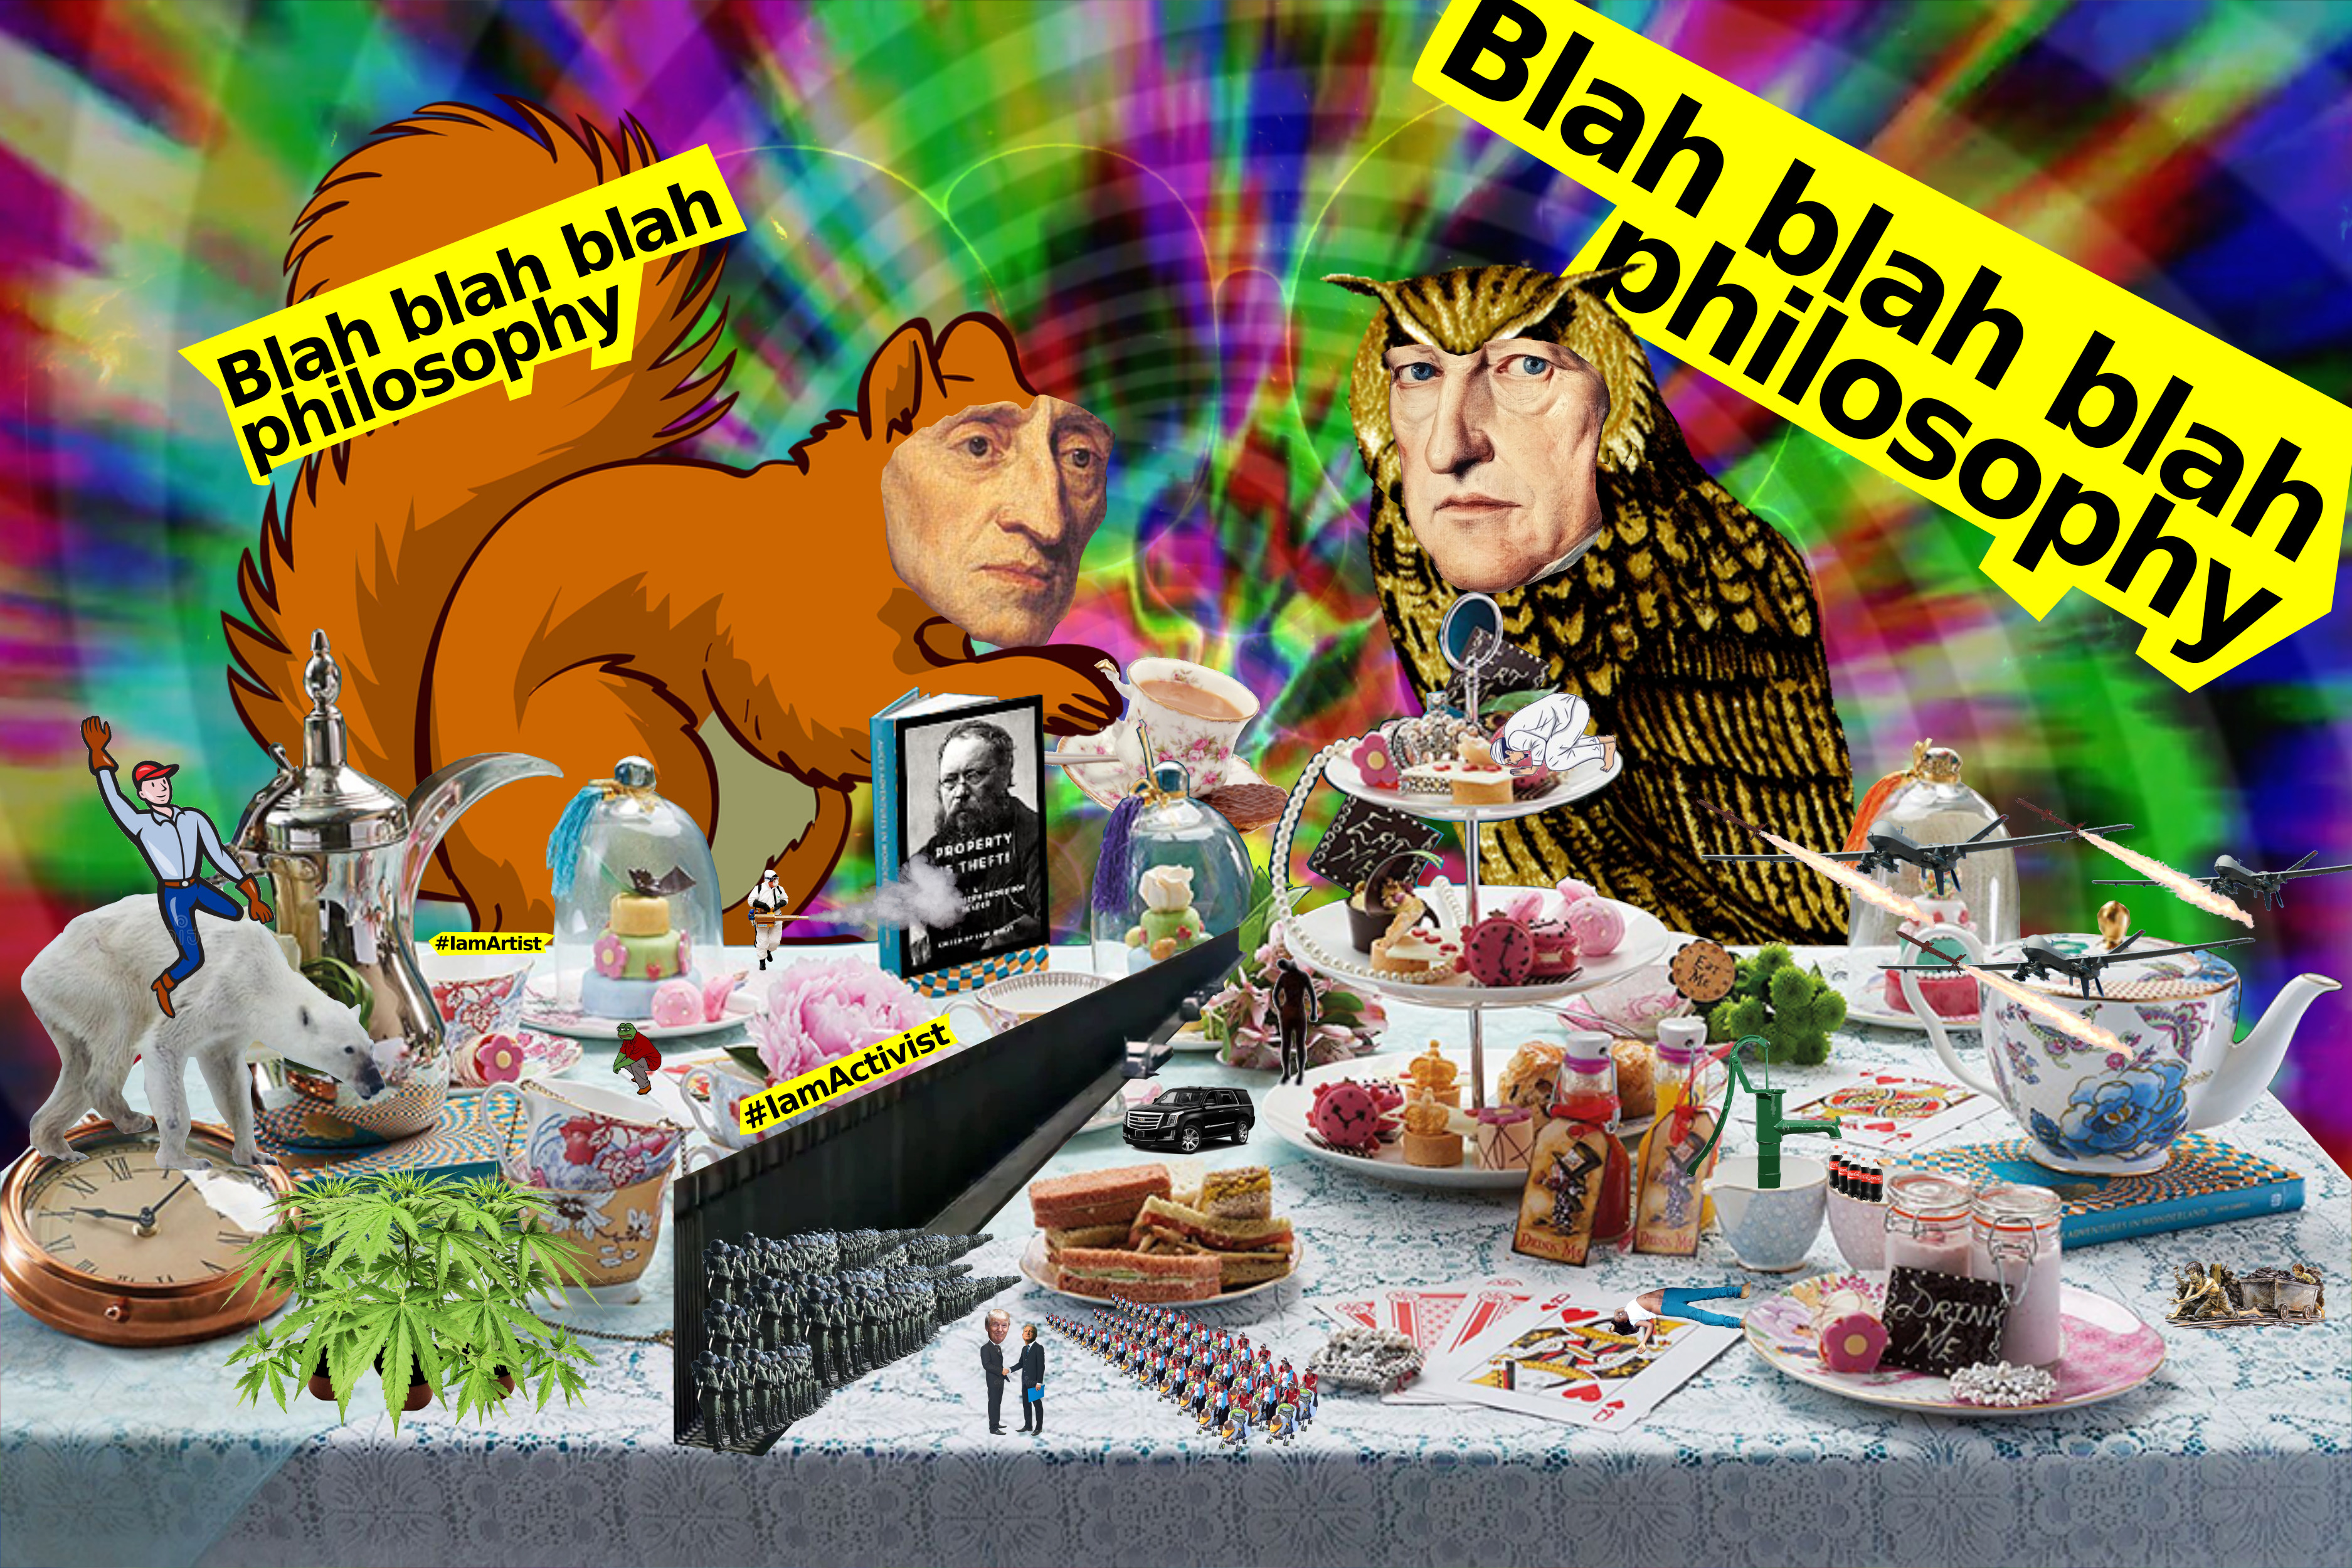 Locke and Hegel drinking tea while discussing several topics on Nothingland…